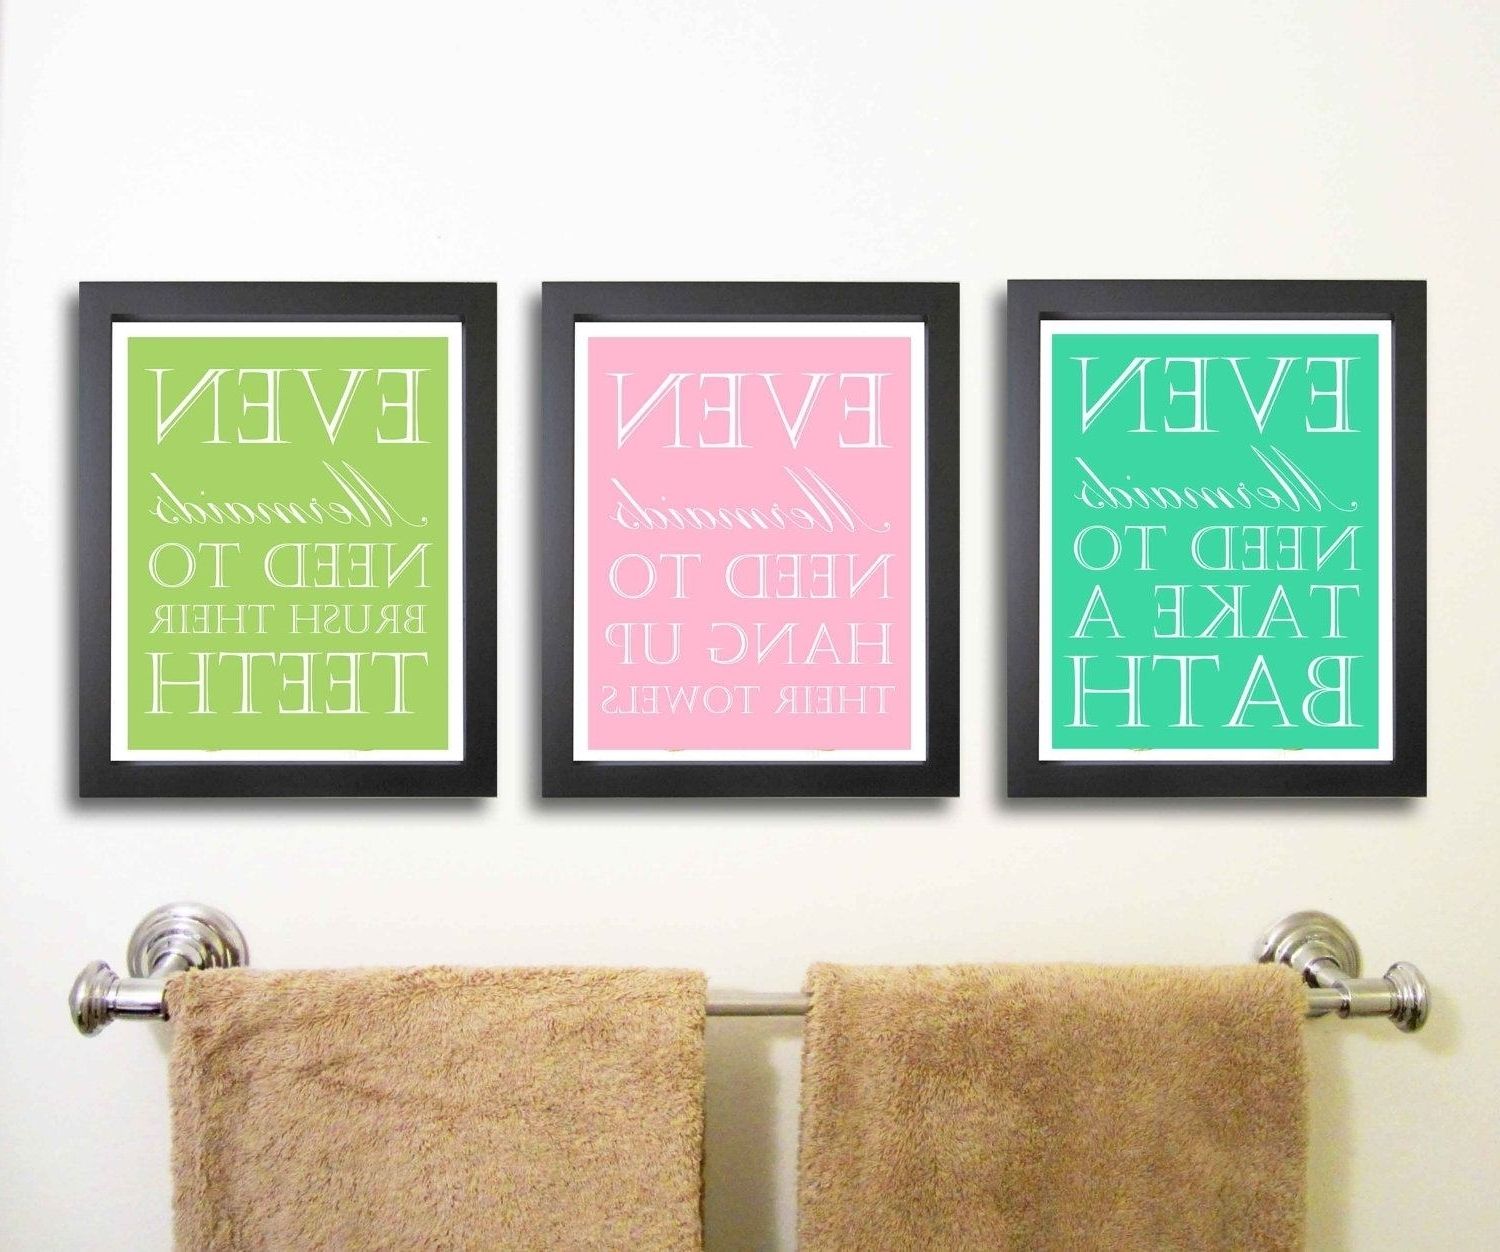 Kids Bathroom Wall Art With Well Known Bathroom Wall Art Ideas Decor Bathroom Wall Art Decor Bathroom (View 3 of 15)